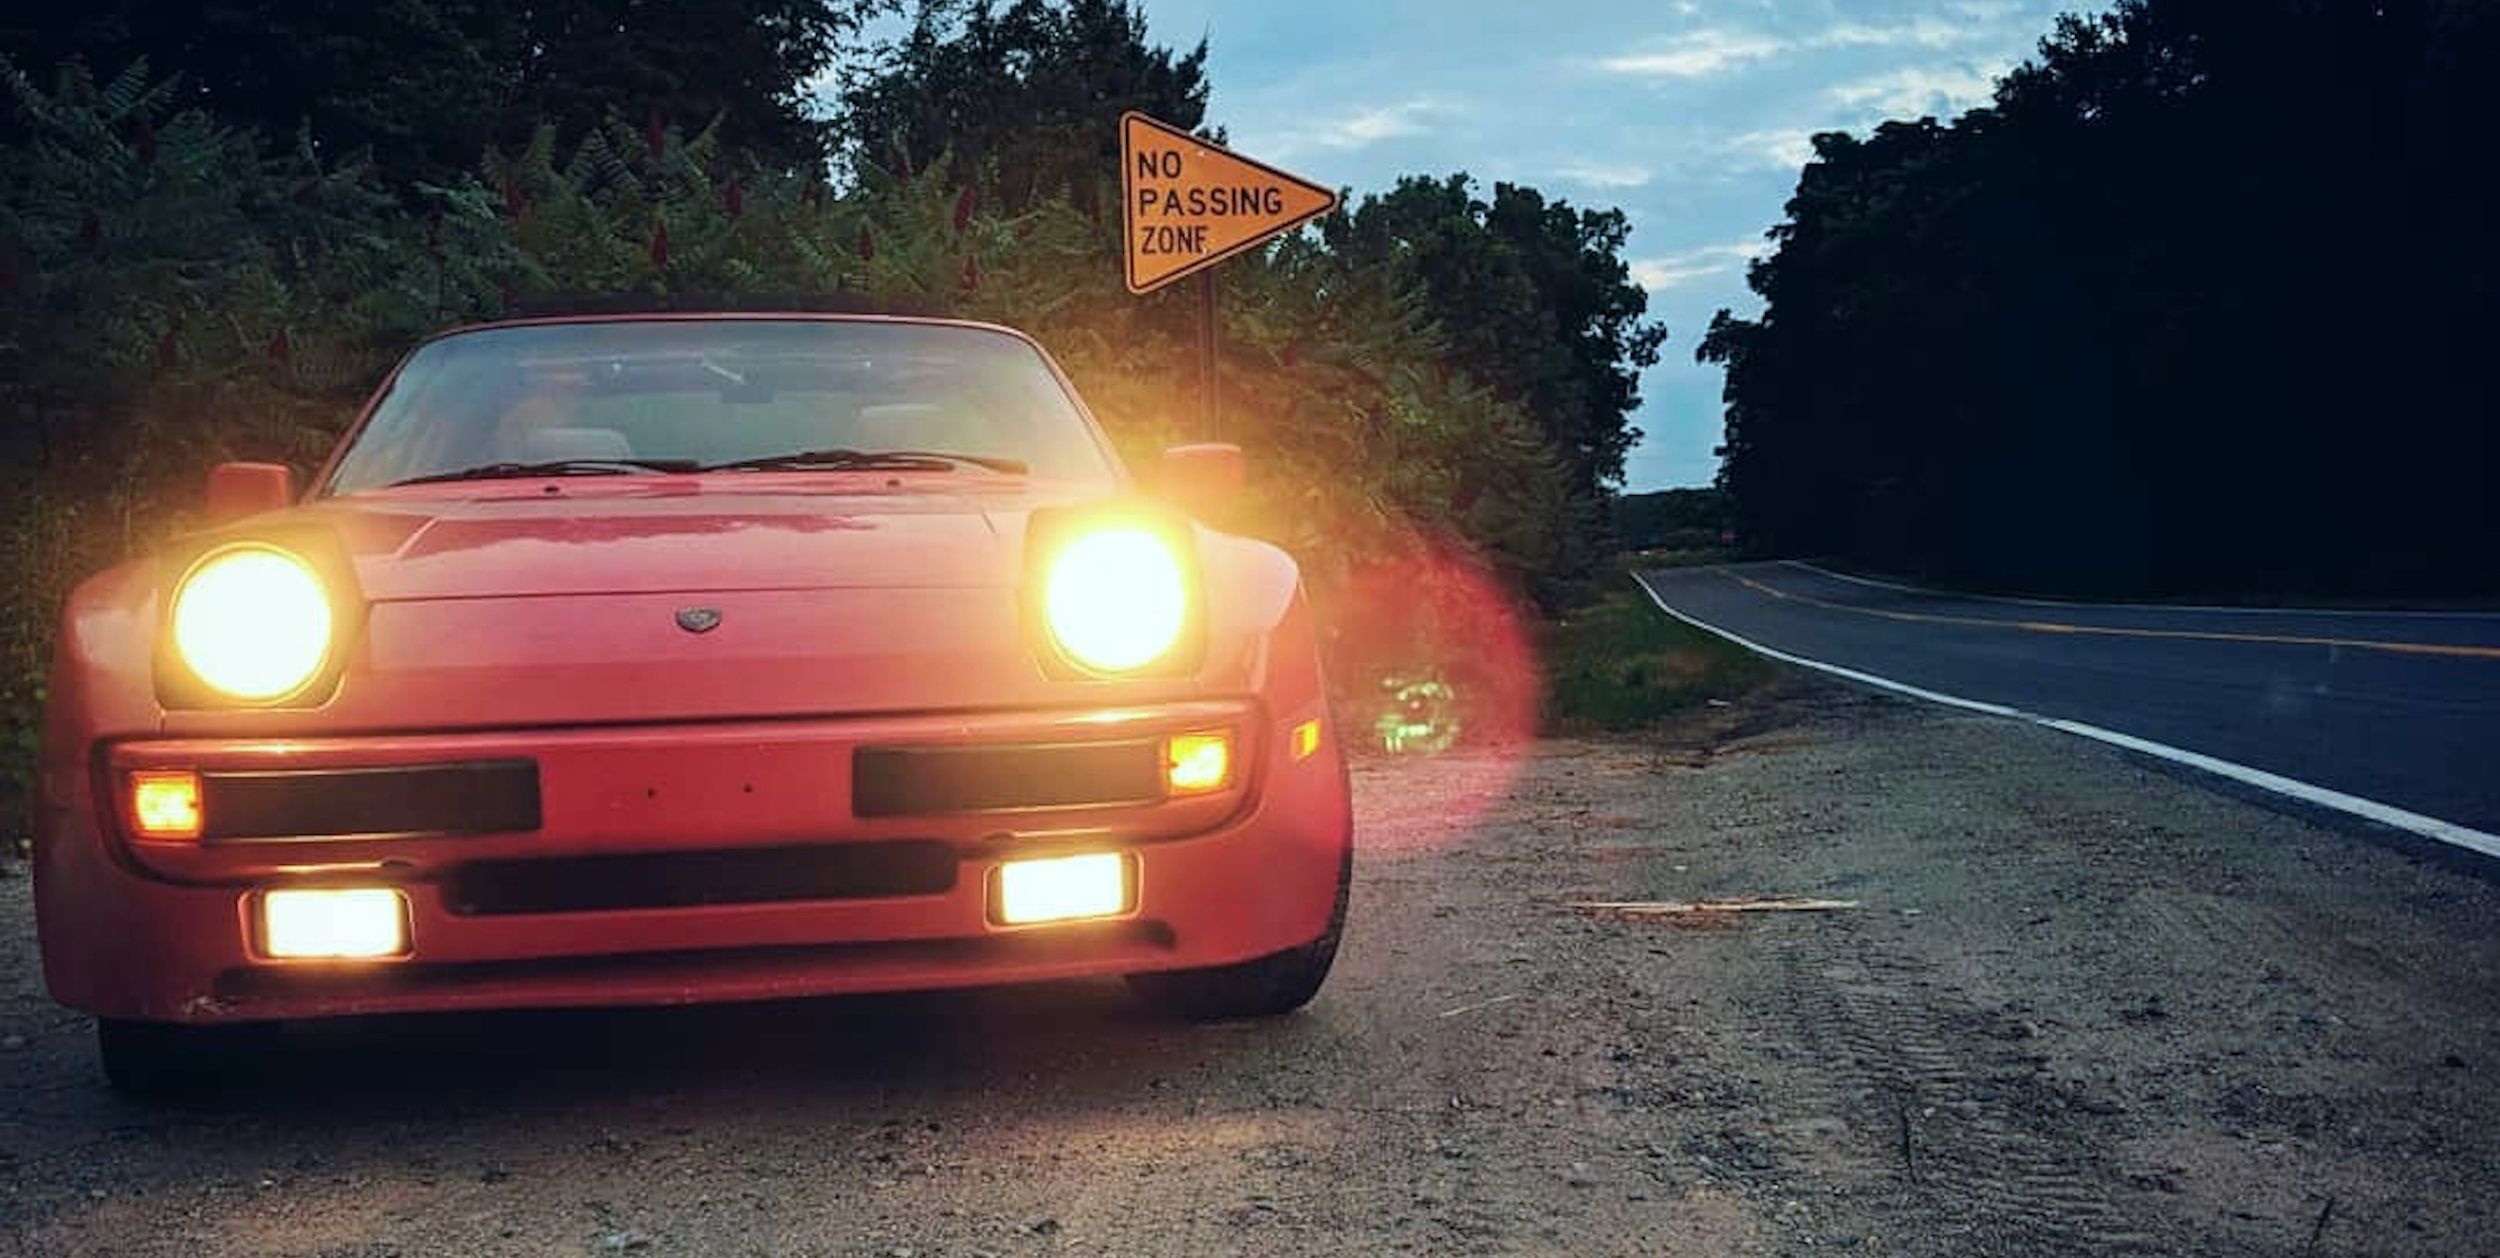 My Porsche 944 Has Been the Endless Headache I Was Warned About